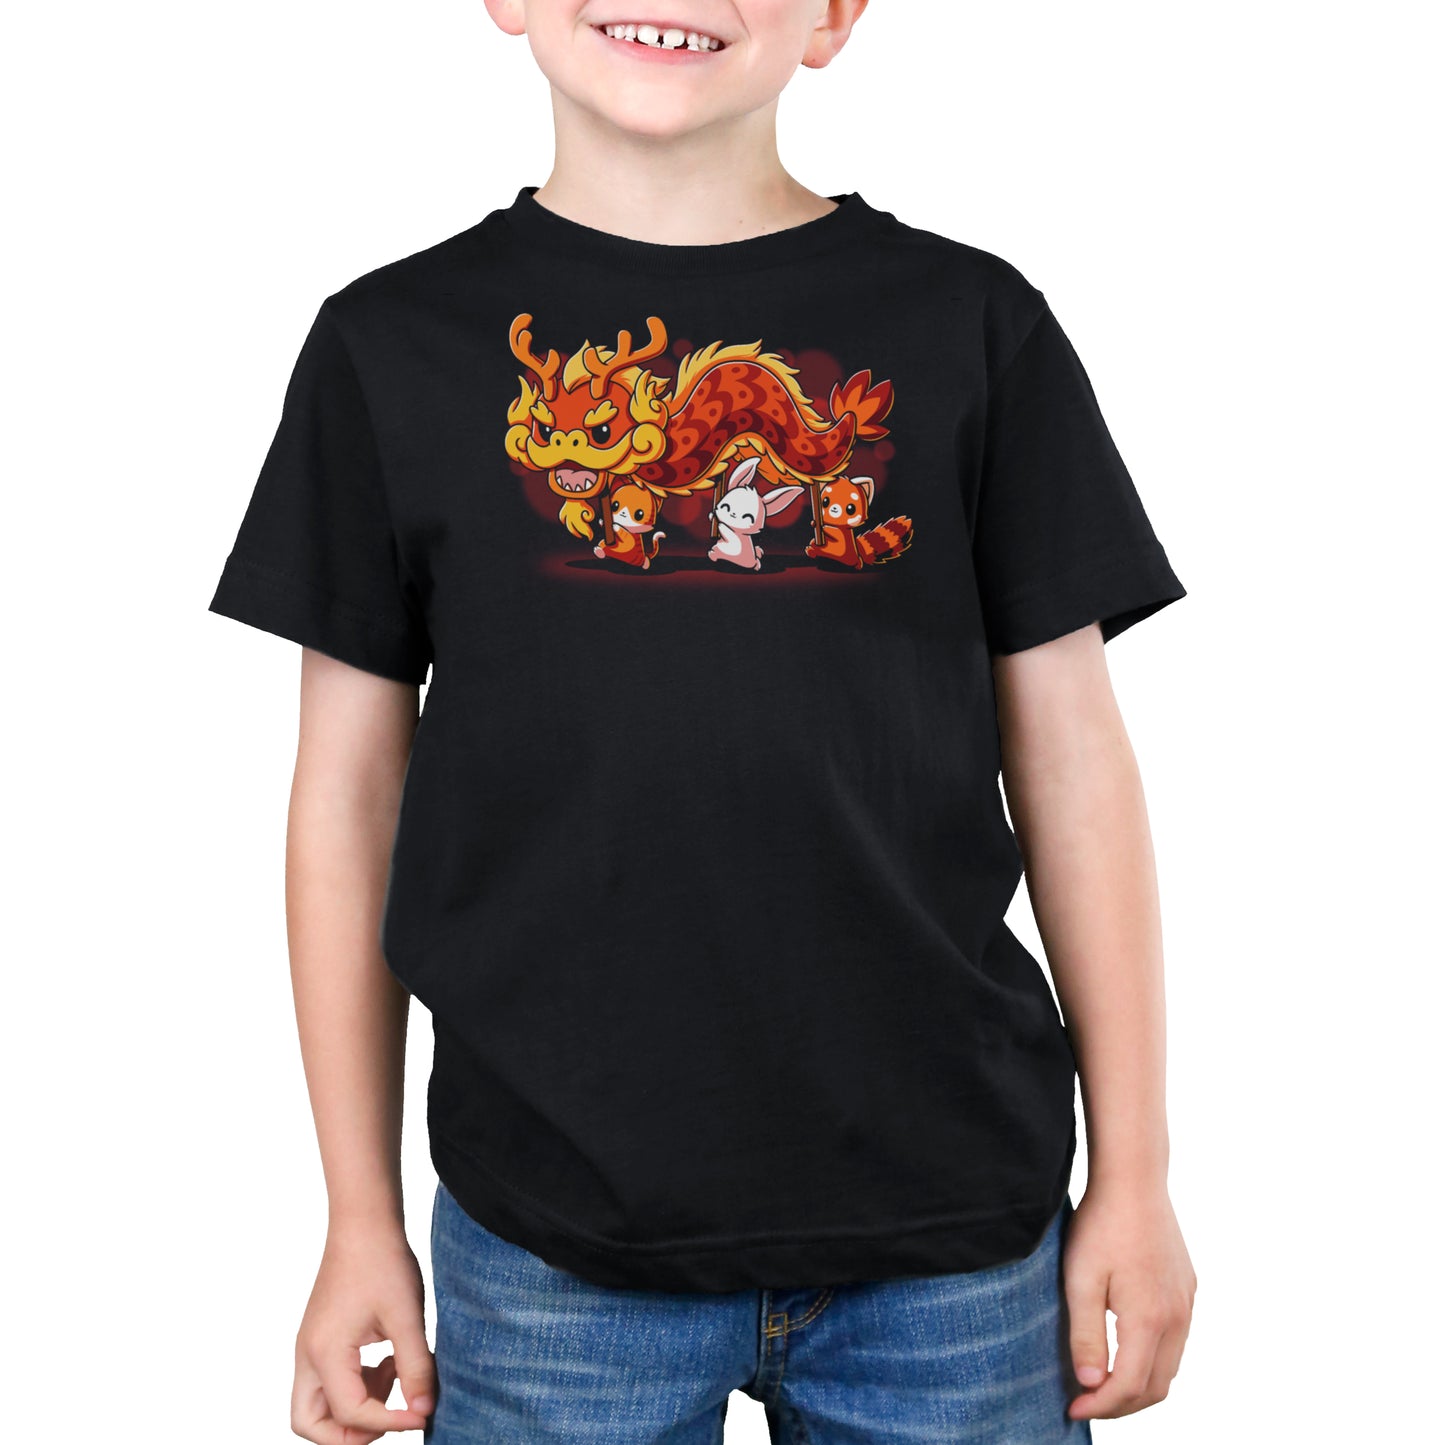 A child wearing monsterdigital's The Dragon Dance, a black unisex tee with a cartoon dragon and a small character design on the front, made from super soft ringspun cotton, paired with blue jeans, smiling and standing against a plain white background.